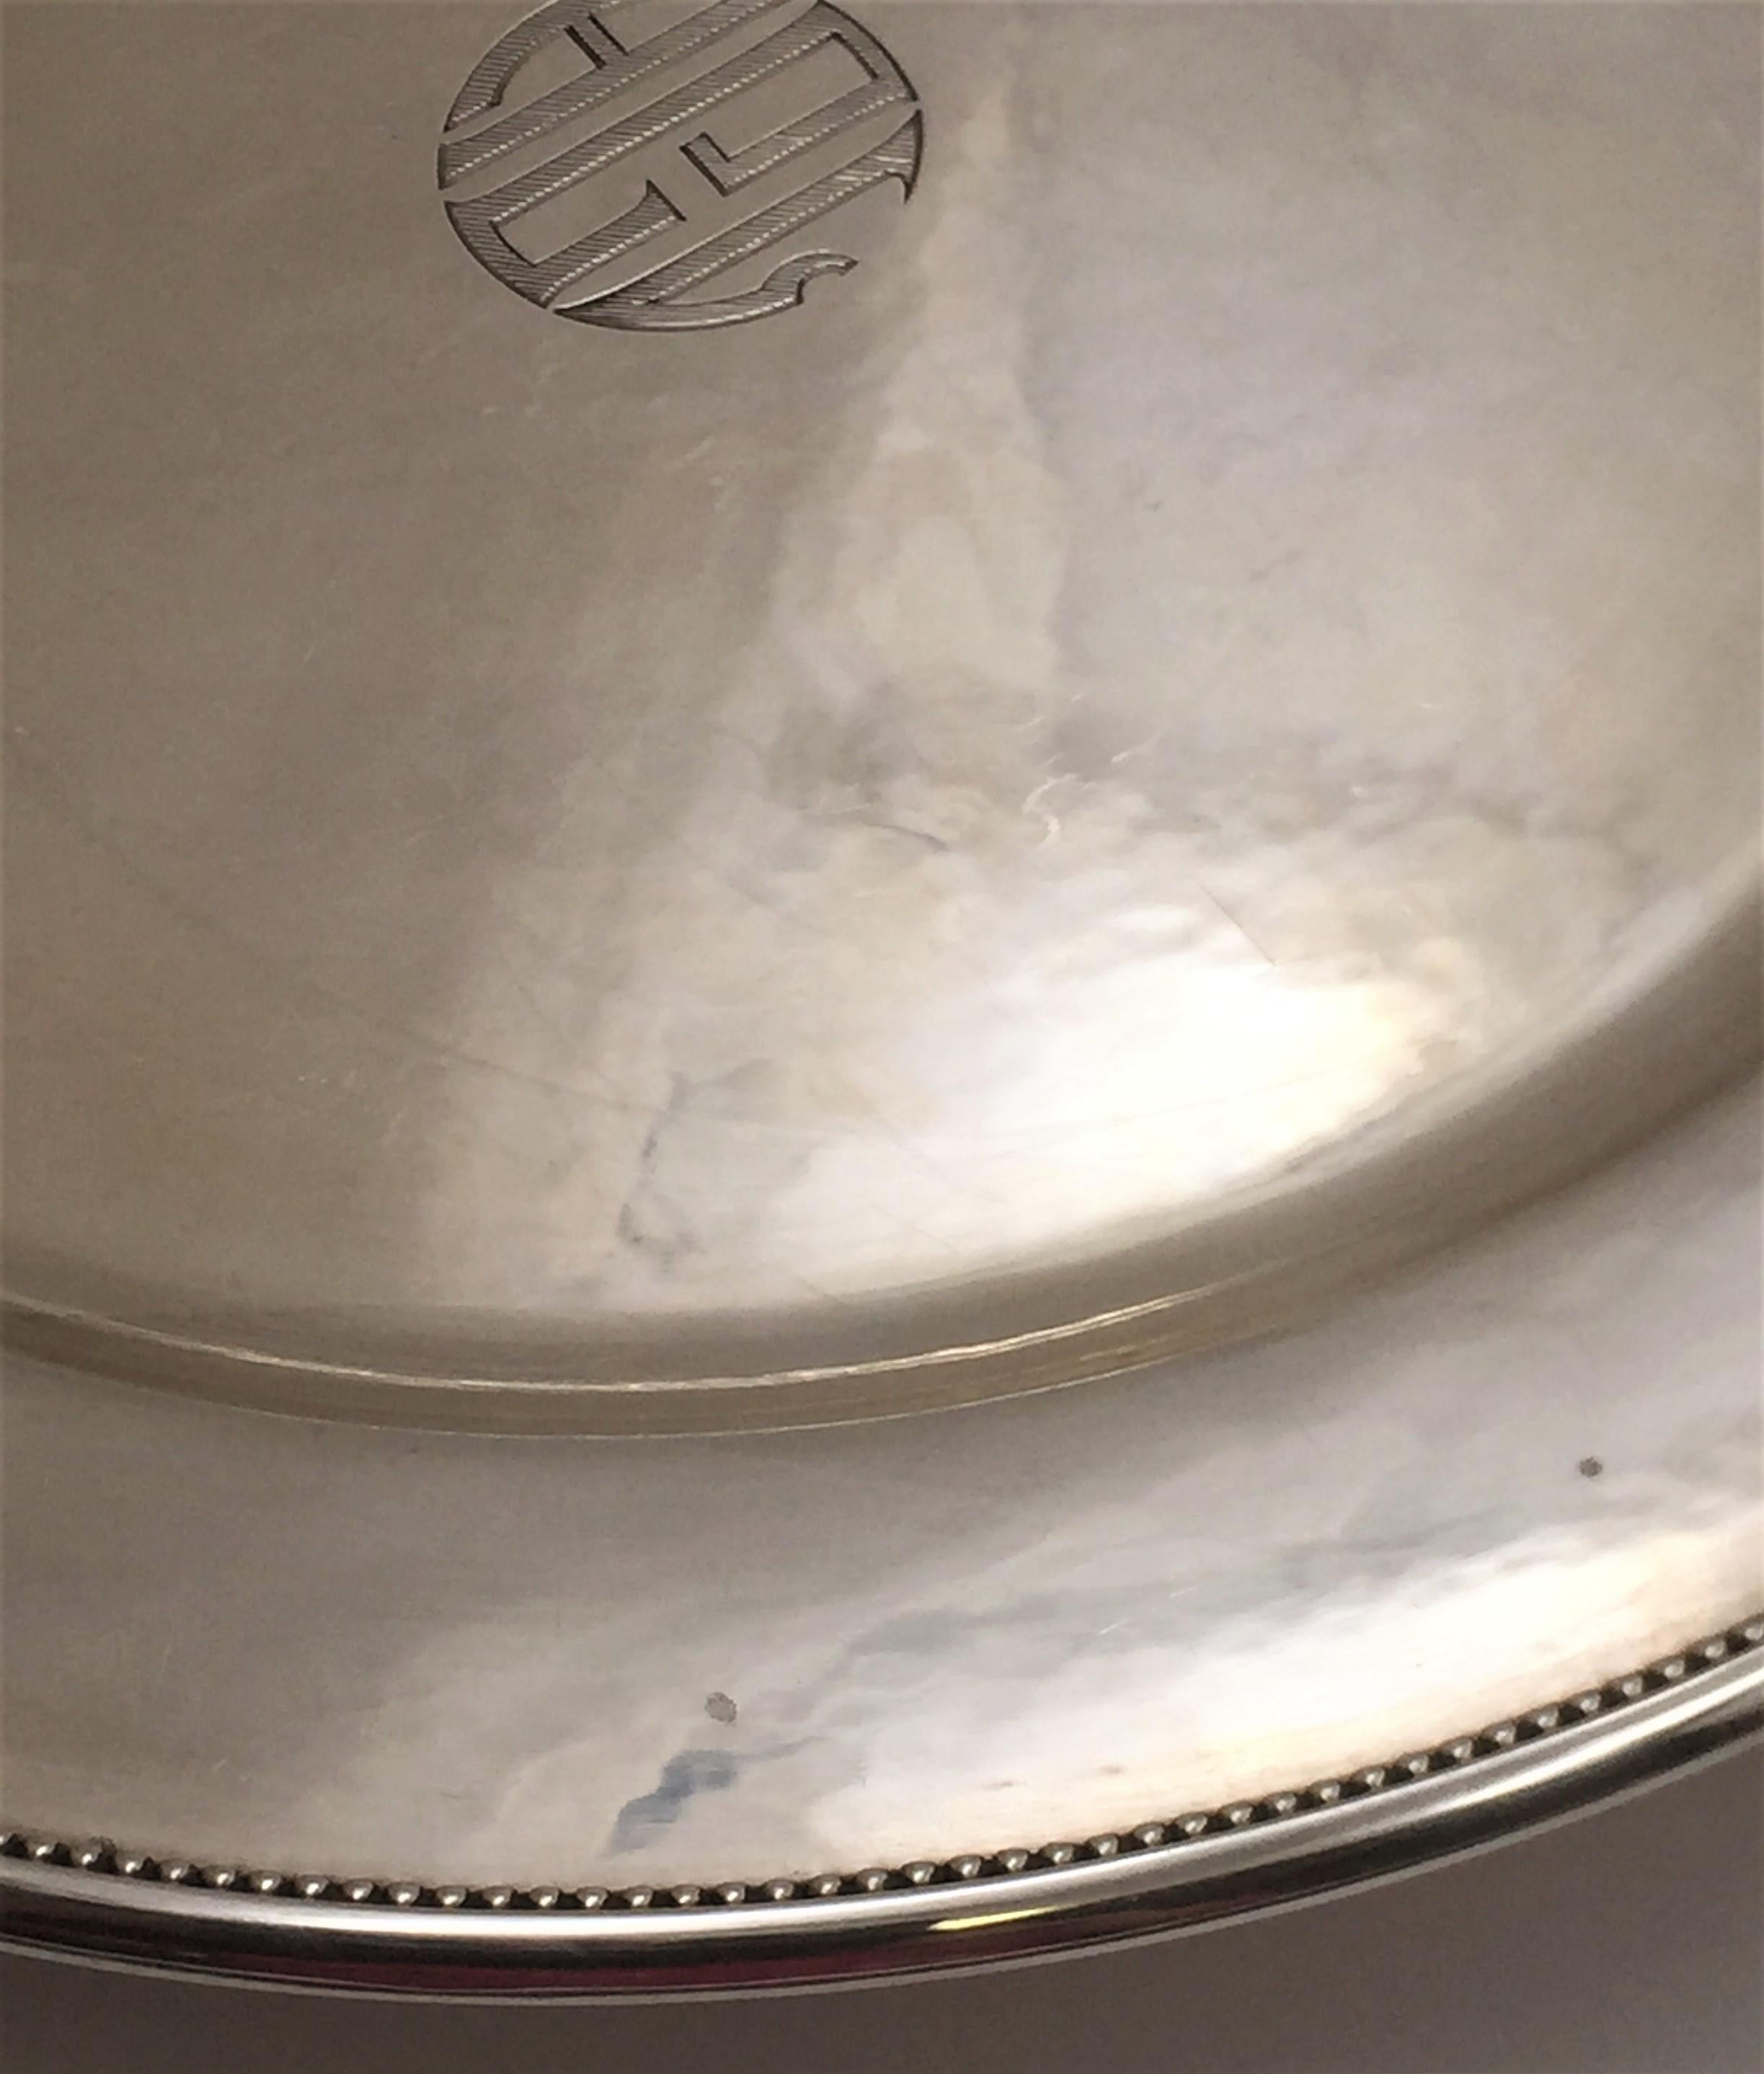 Georg Jensen set of 12 sterling silver chargers/dinner plates (diameter 11in) with a hand-hammered surface and a beaded rim pattern along the edge, bearing hallmarks and monograms as shown. Total weight is 254 ozt.

Danish silversmith George Jensen